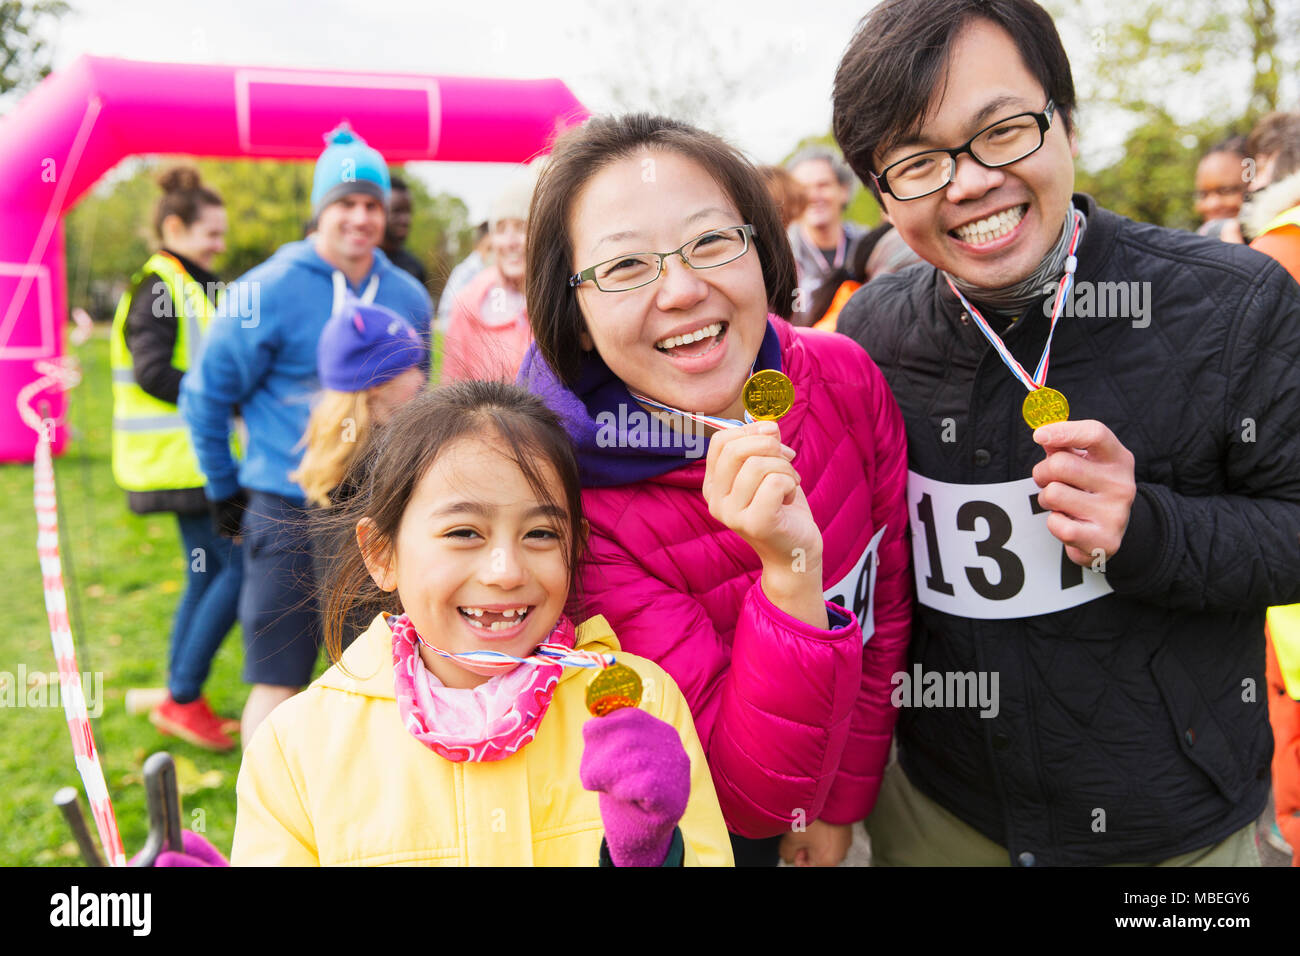 Portrait enthusiastic family runners showing medals at charity run Stock Photo